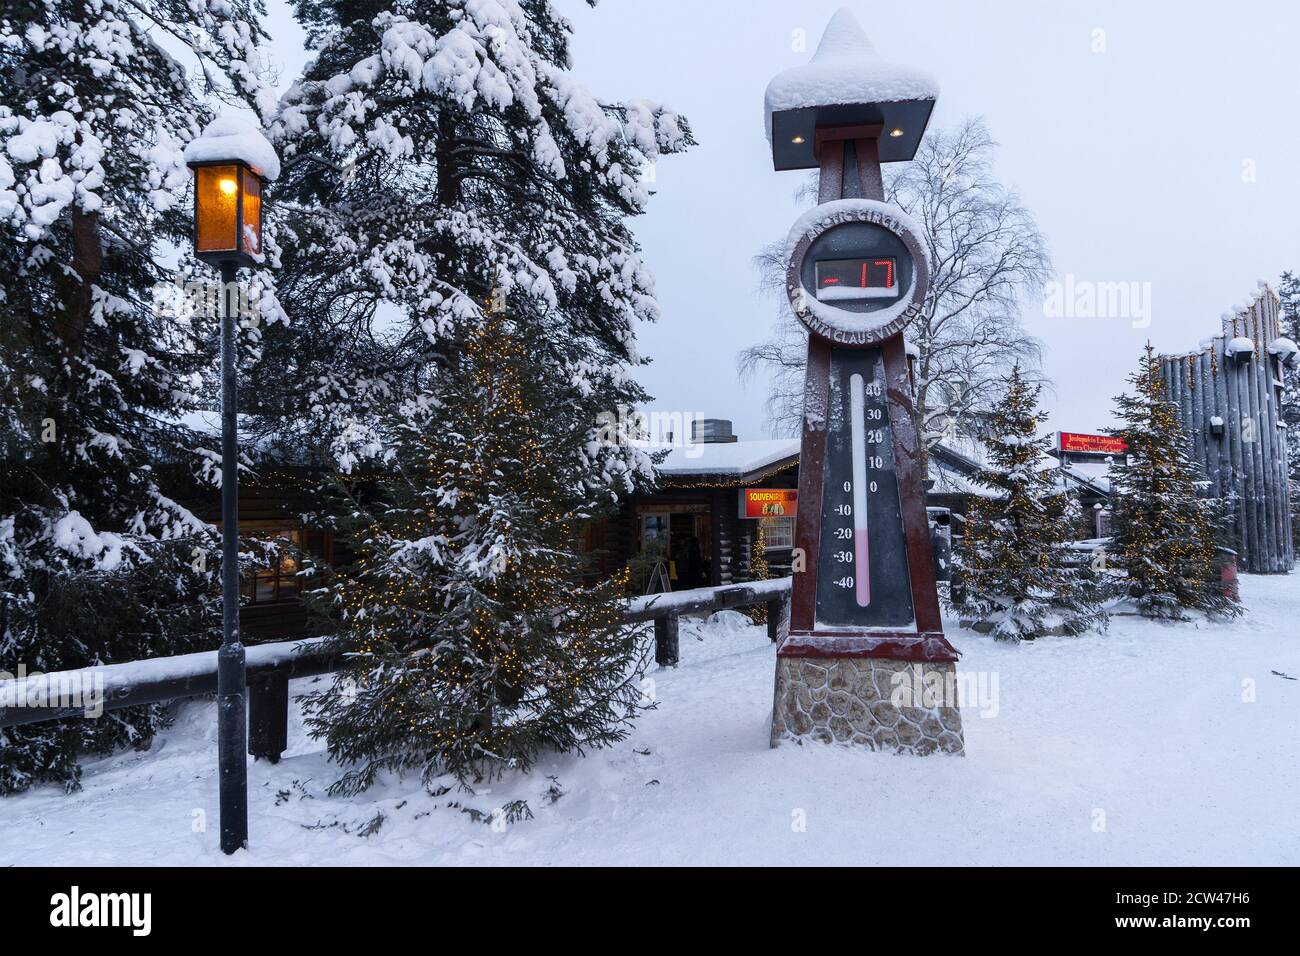 Big frozen street clock showing 17 degrees below zero in the Santa Claus village. Winter Christmas and New Year background. Stock Photo